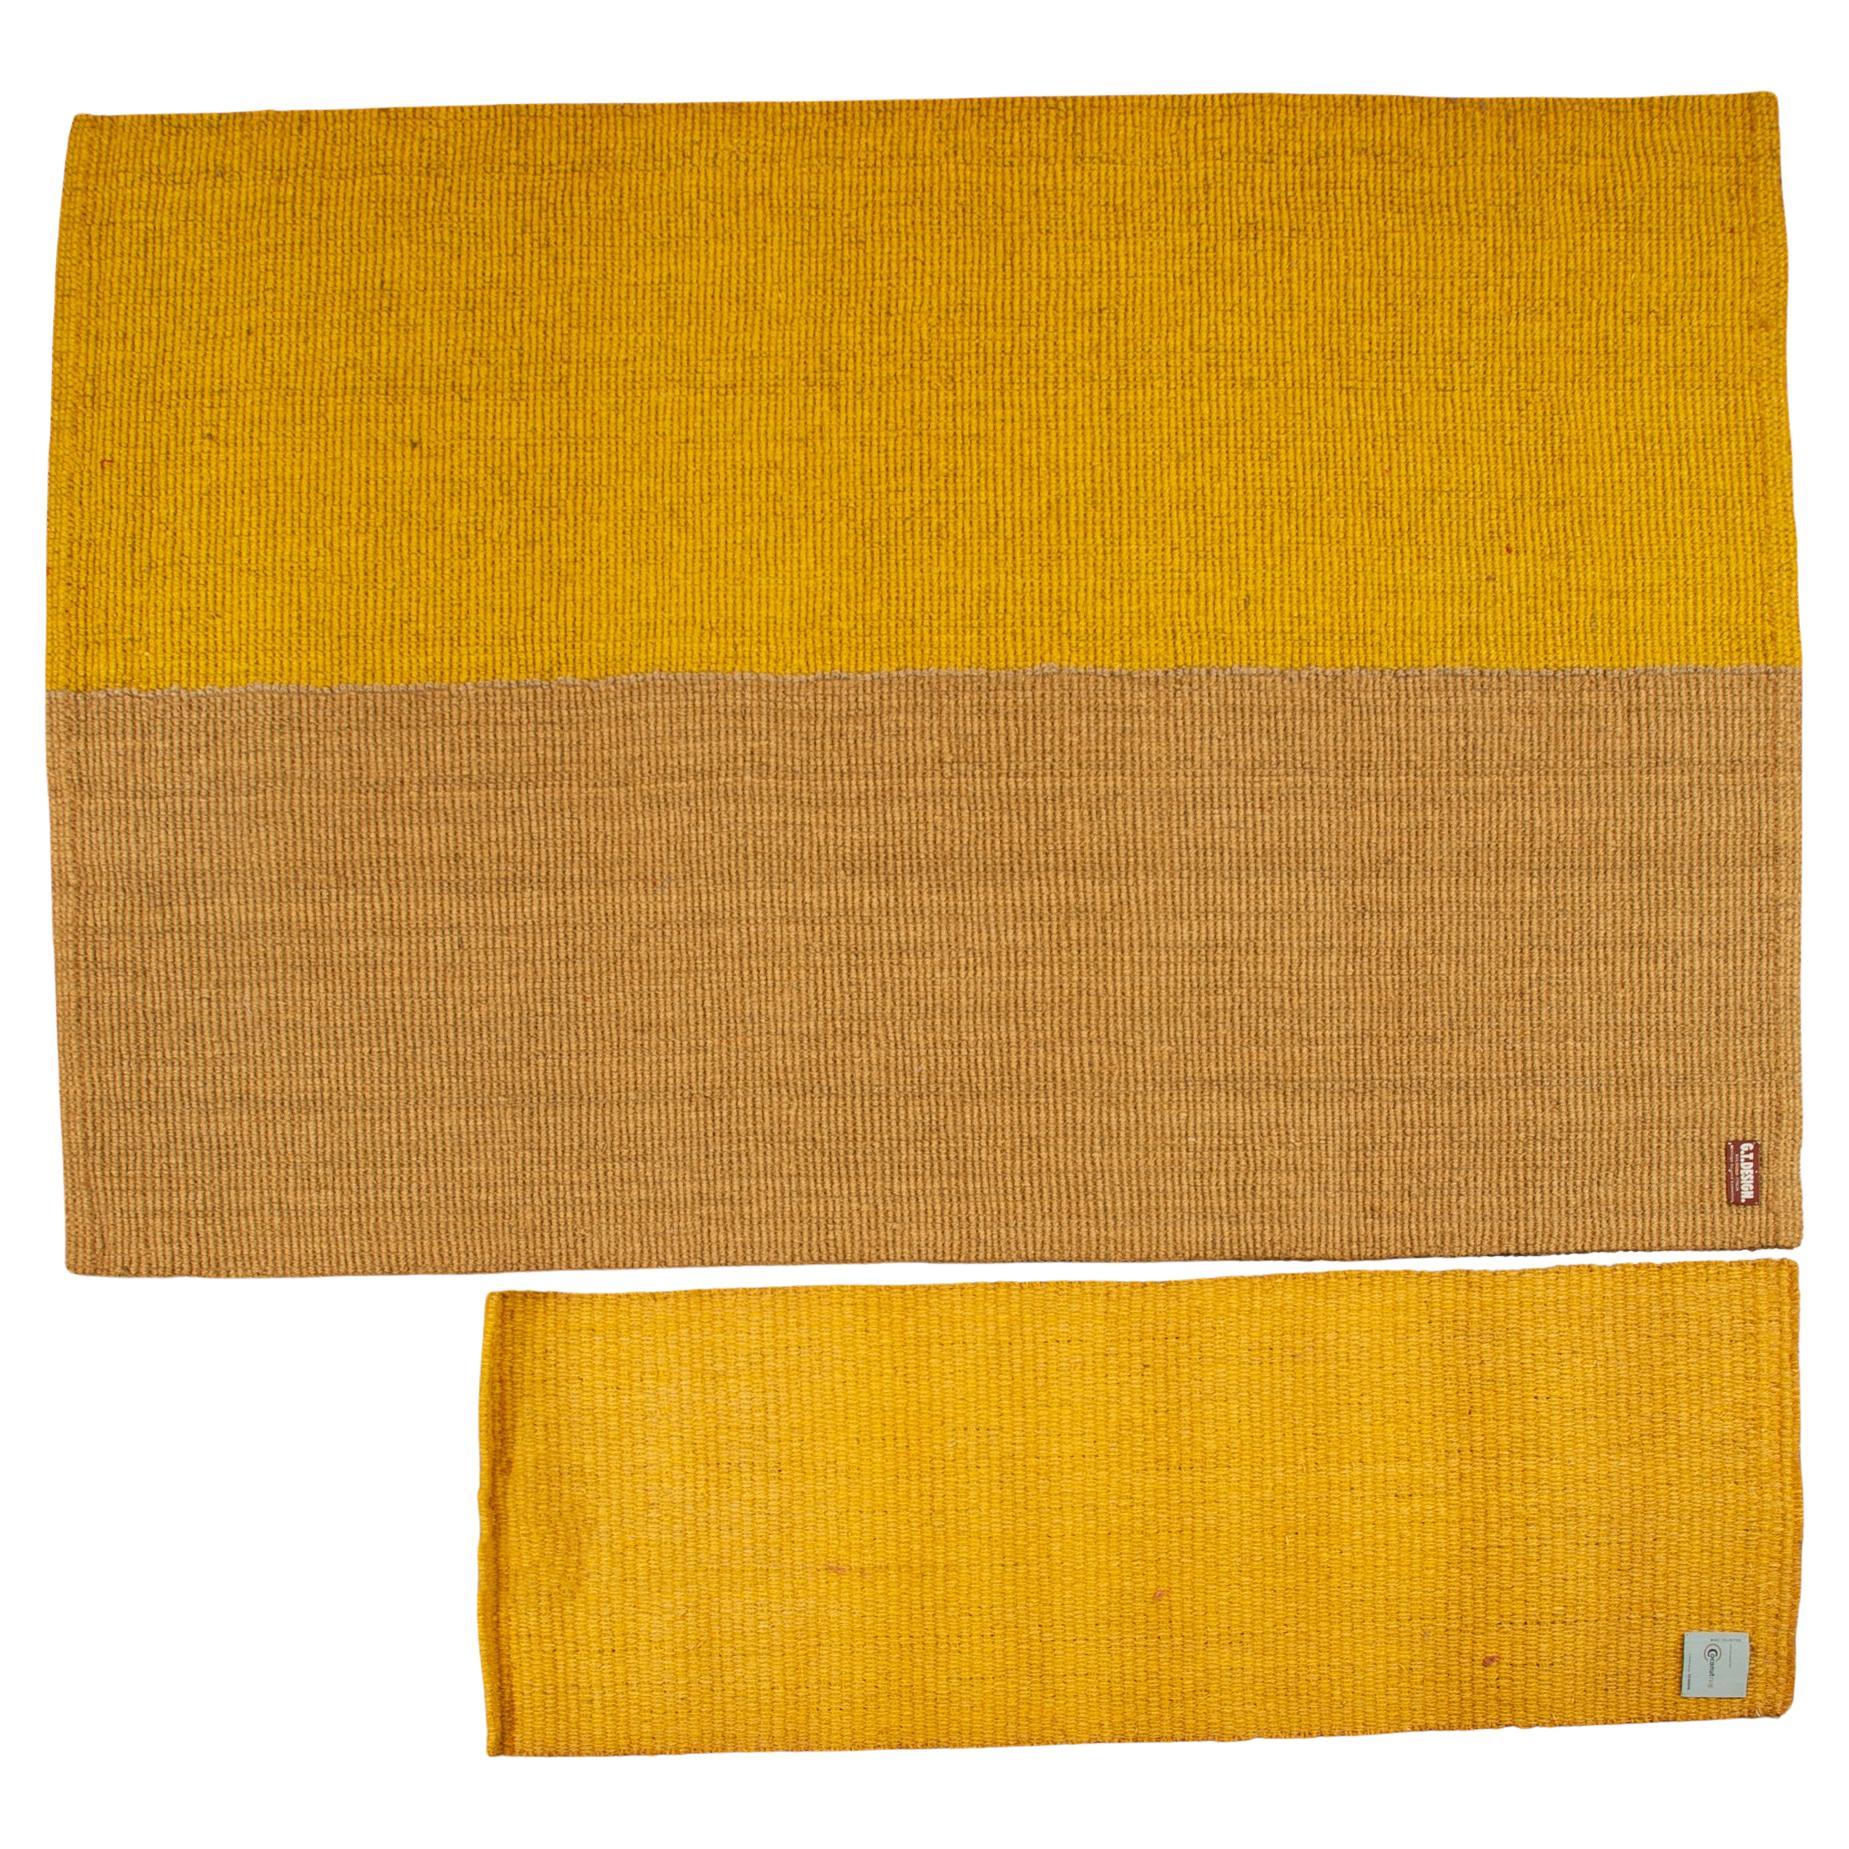 Interesting coconut rugs by G.T.Design, designed by Deanna Comellini, founder and Art Director of this Italian brand. These were two carpets of a limited edition dated 2010. The colors are yellow and camel.
For the little gallery: I cannot write